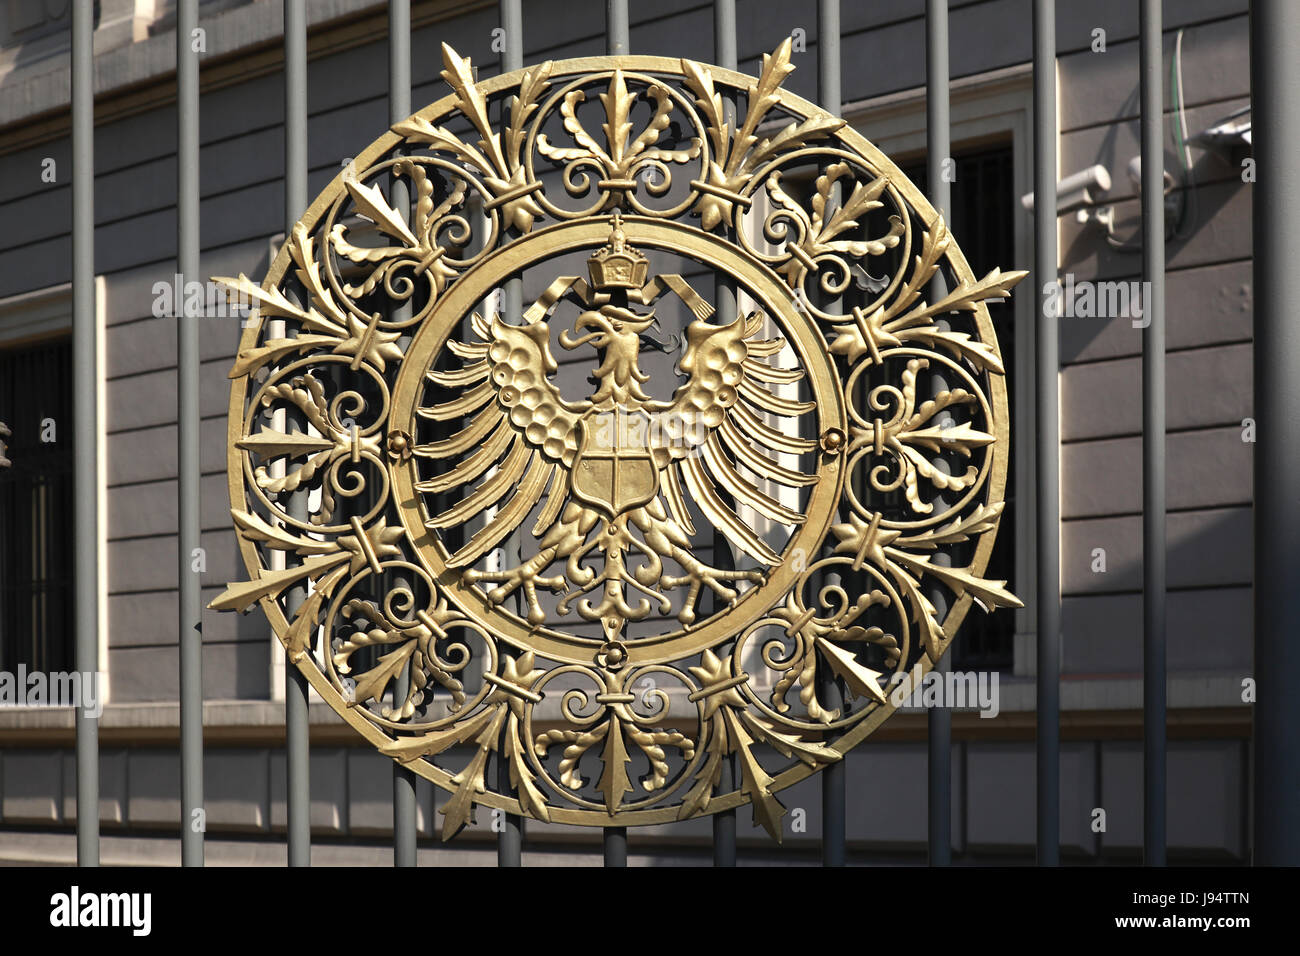 crests german consulate general istanbul Stock Photo